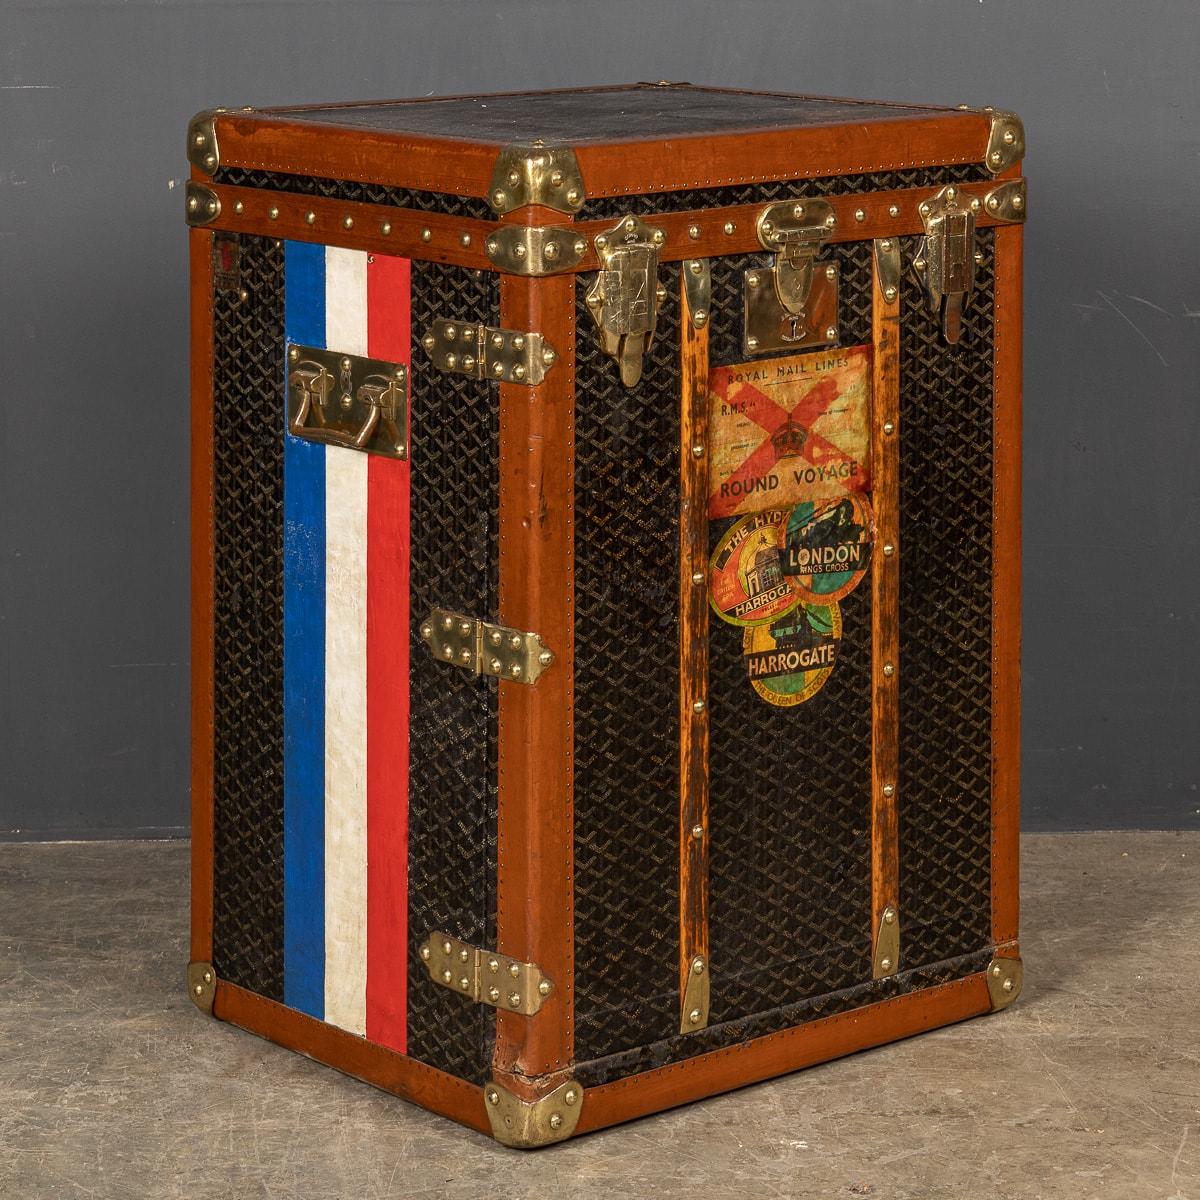 Antique 20th Century Goyard steamer trunk with drawers, the chest opens from the top and front, a perfect steamer trunk with original felt lined top tray and canvas lined drawers along with a hat tray. This trunk is in the classic Goyard chevron